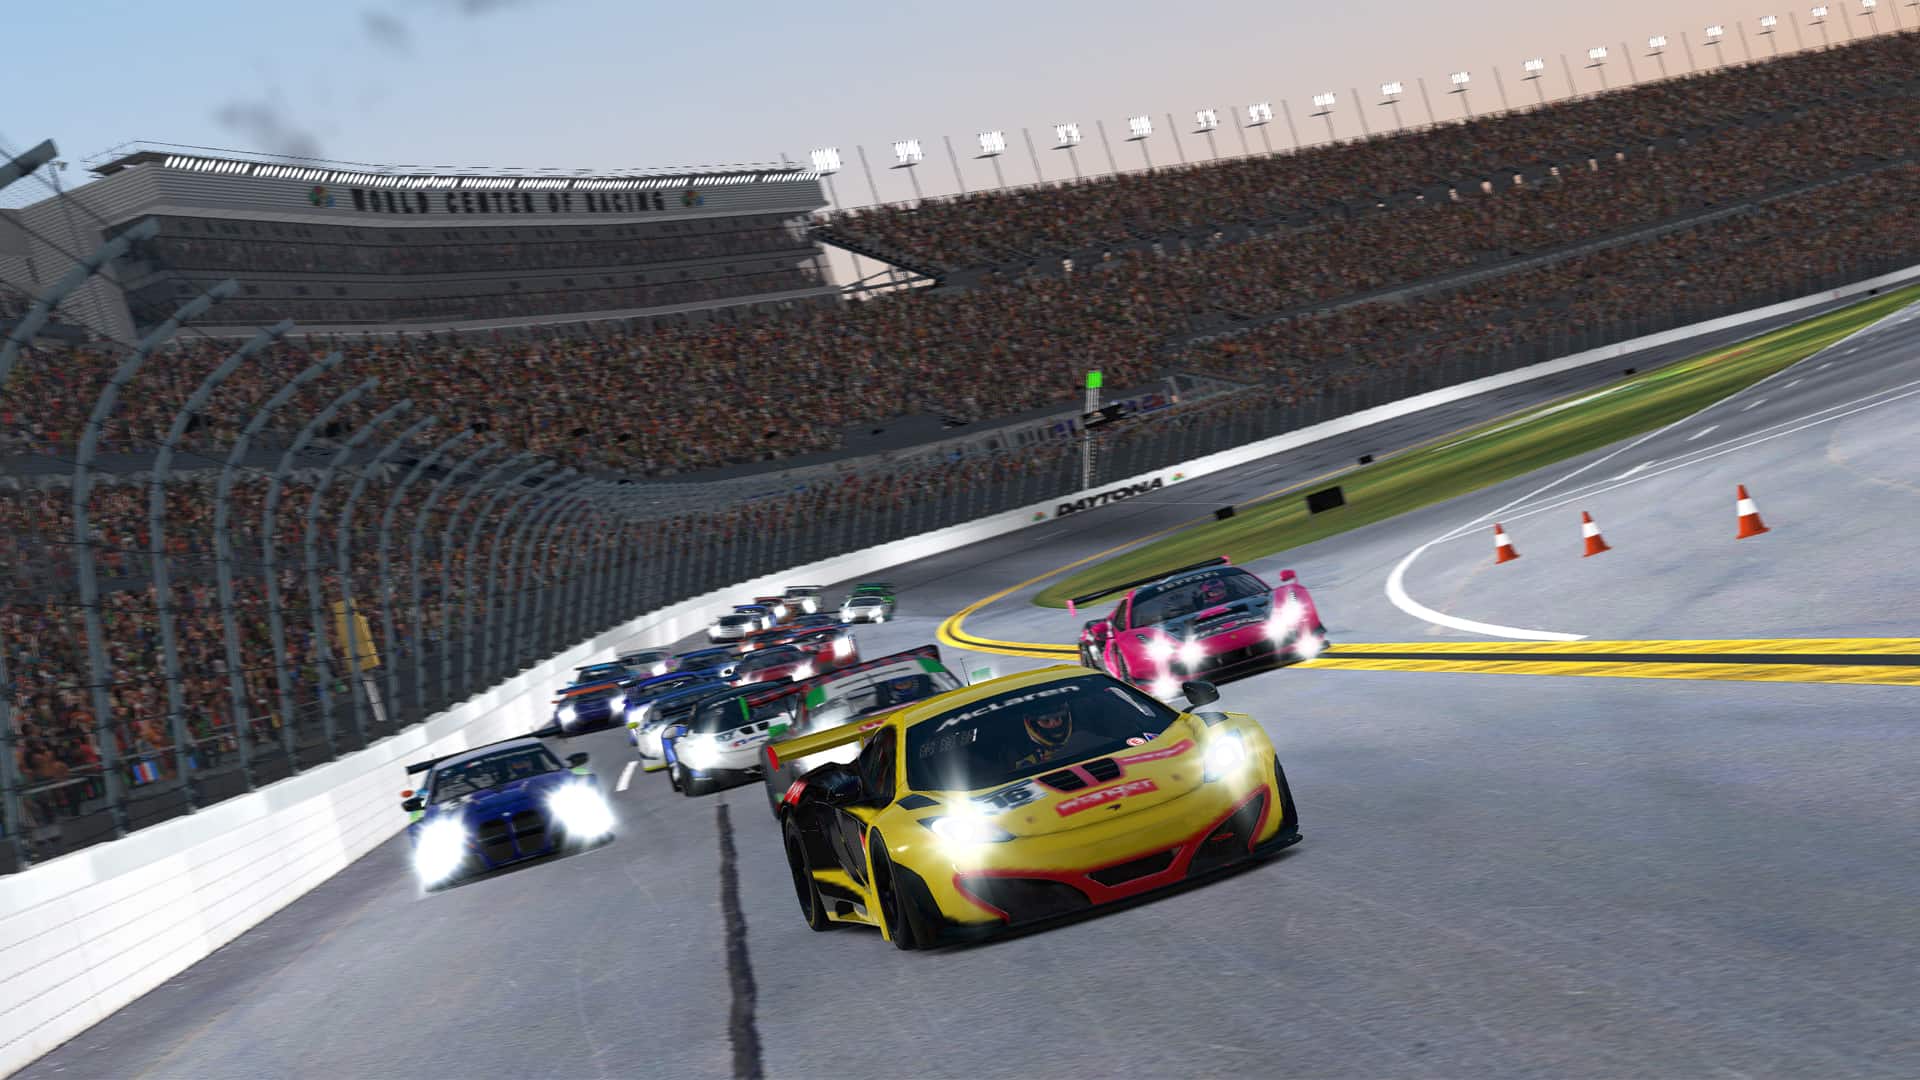 2023 iRacing Season 1 Patch 2 includes new BoP adjustments for GT3s